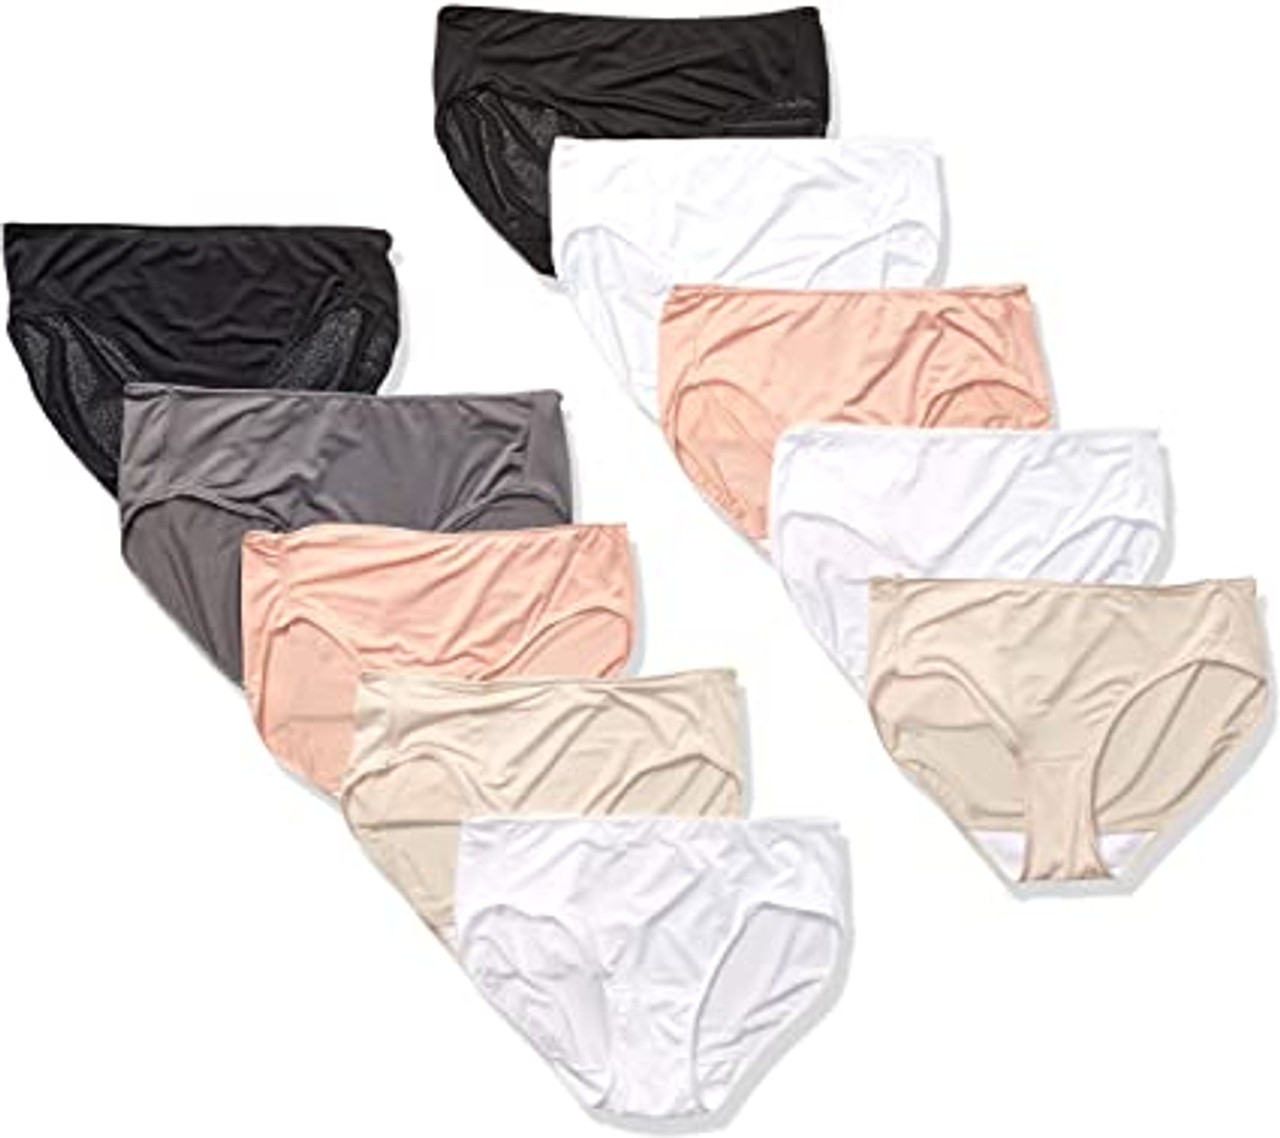 Women Underwear Hanes Ultimate Cotton Breathable 6pack - A. Ally